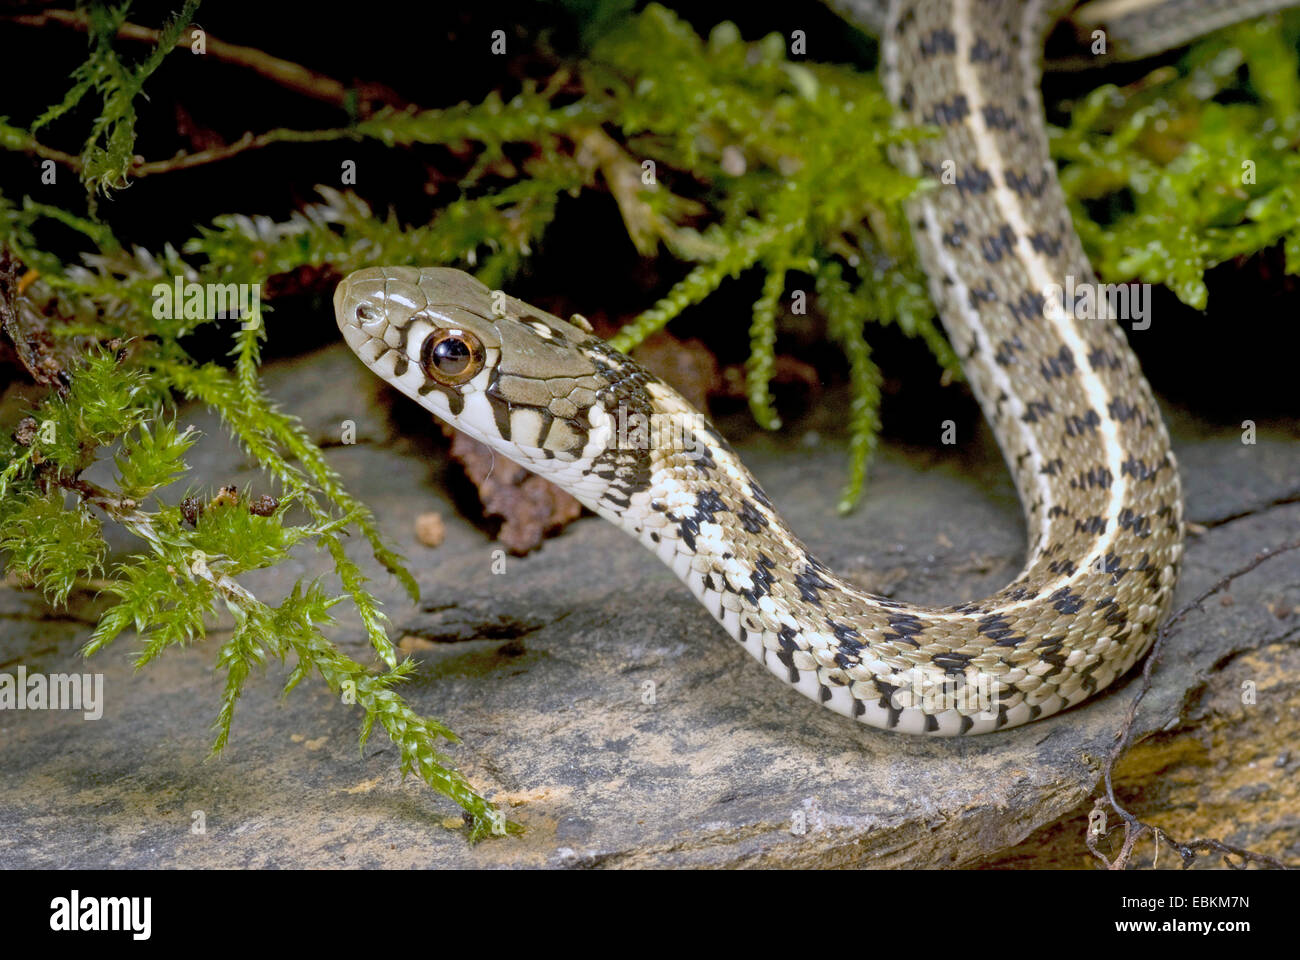 Giarrettiera a scacchi Snake (Thamnophis marcianus), giacente in MOSS Foto Stock